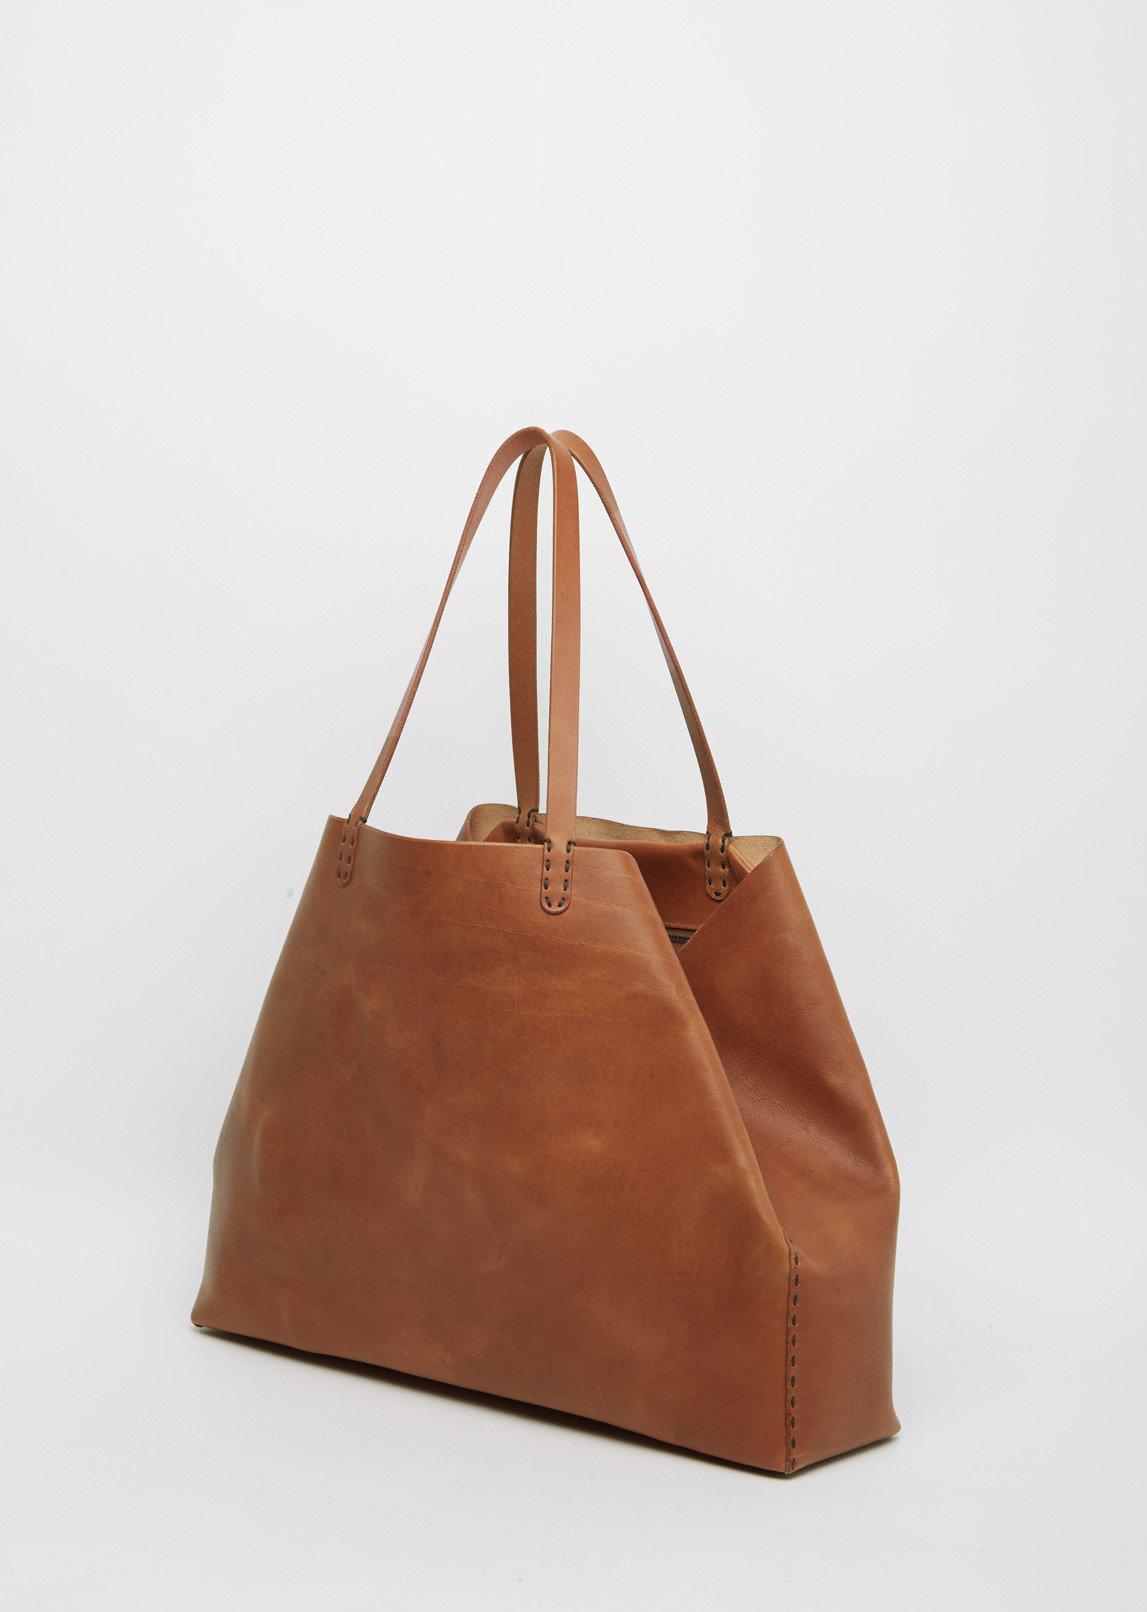 Henry Cuir Leather Parenthese Large Shoulder Bag in Brown - Lyst